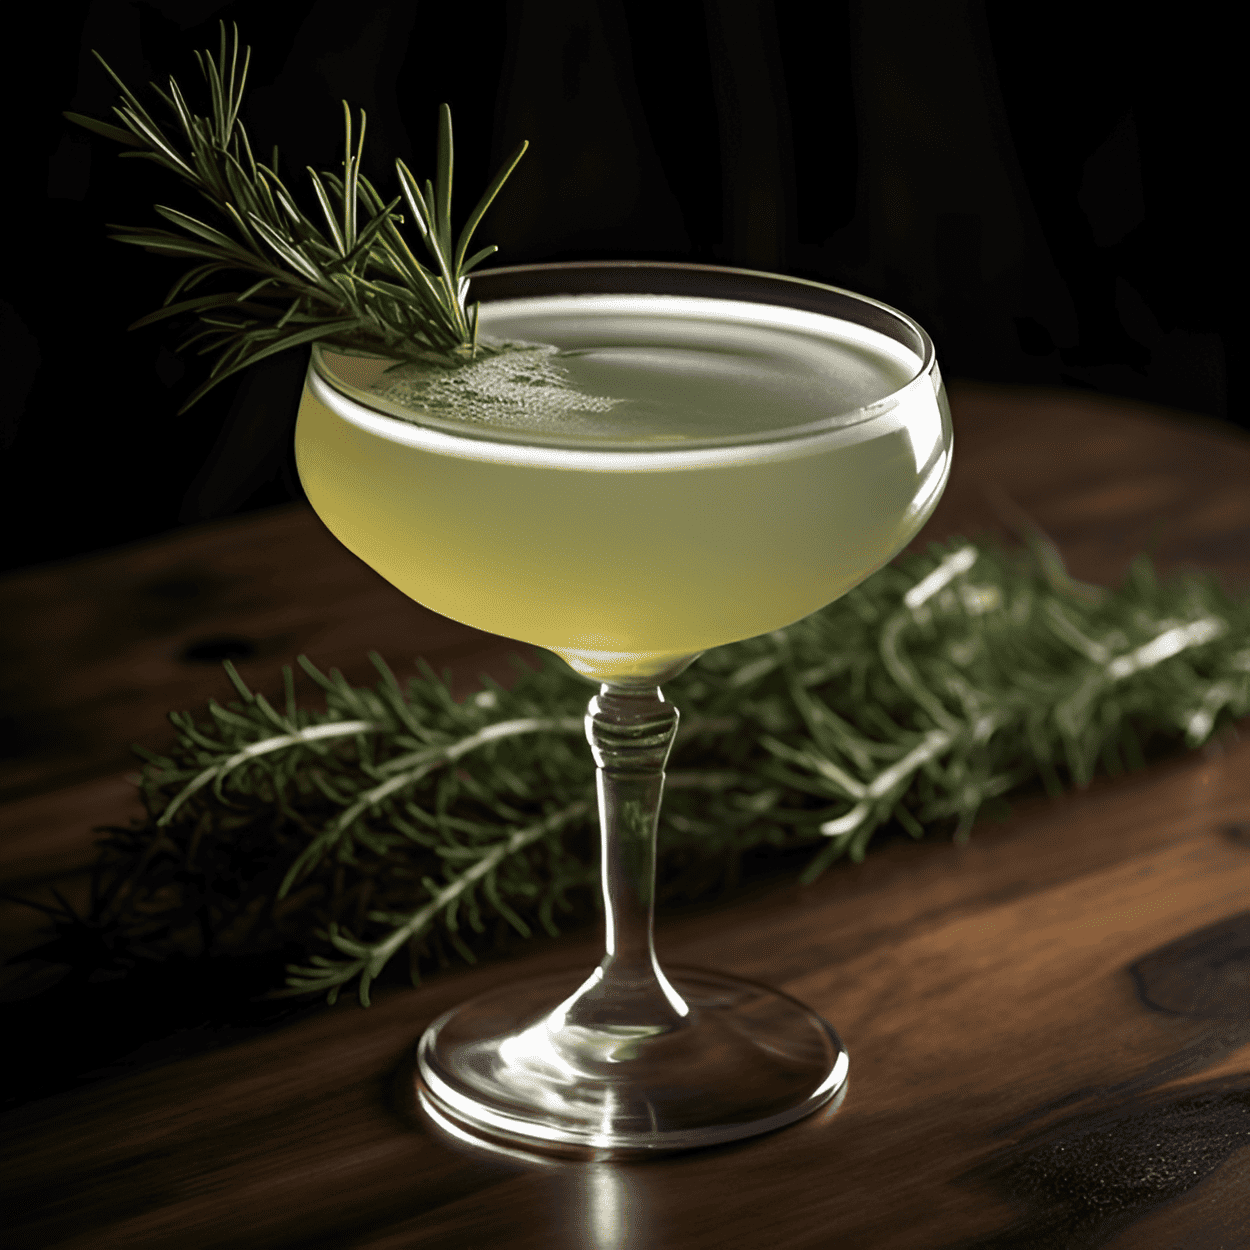 Hemlock Cocktail Recipe - The Hemlock cocktail is a complex mix of flavors. It's strong, with a noticeable kick from the gin, but it's also slightly sweet, thanks to the vermouth. The absinthe adds a touch of bitterness, while the orange bitters provide a hint of citrus. It's a cocktail that's both refreshing and robust.